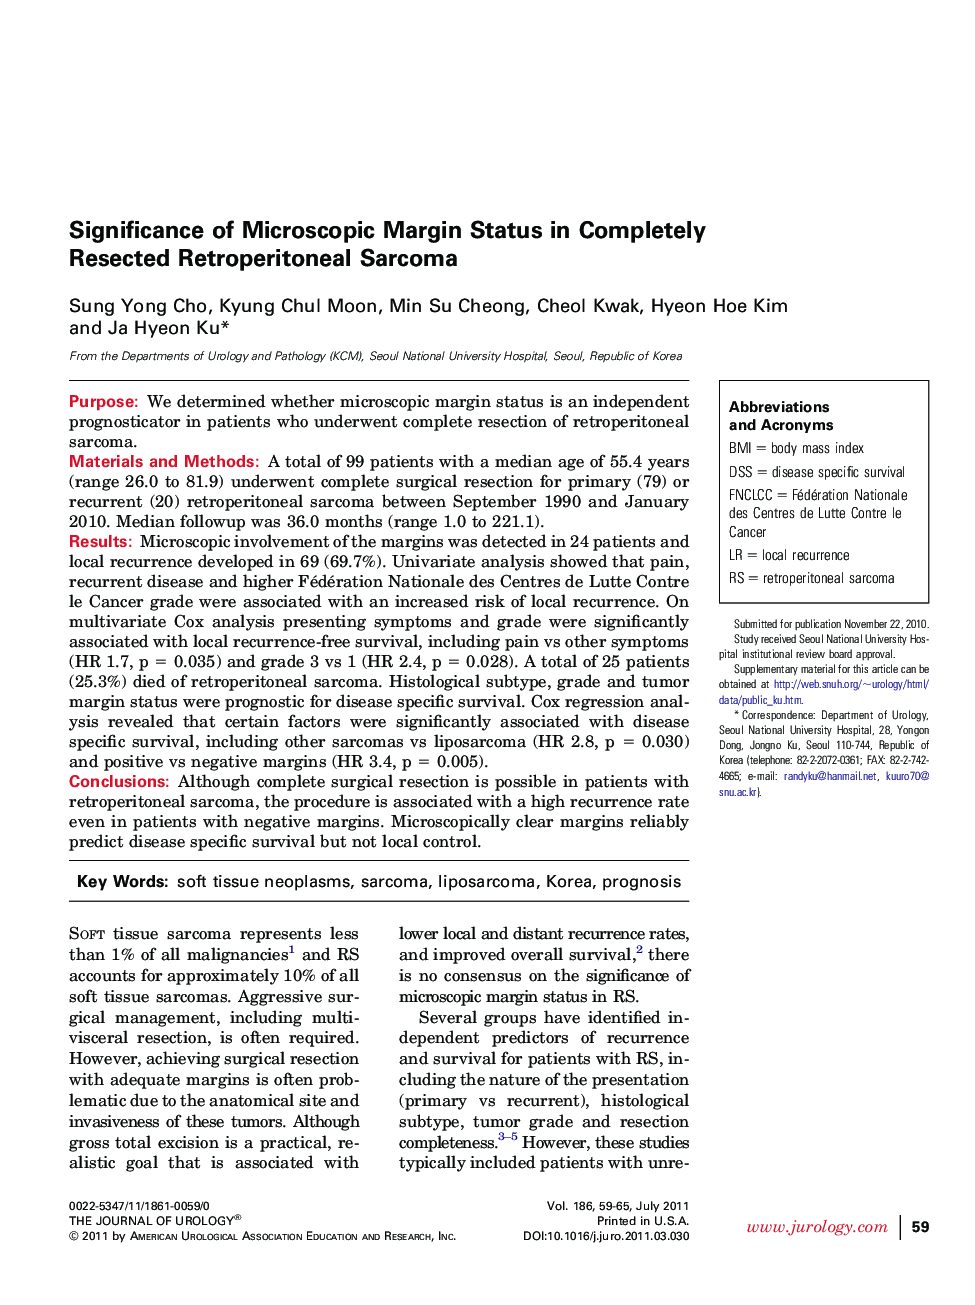 Significance of Microscopic Margin Status in Completely Resected Retroperitoneal Sarcoma 